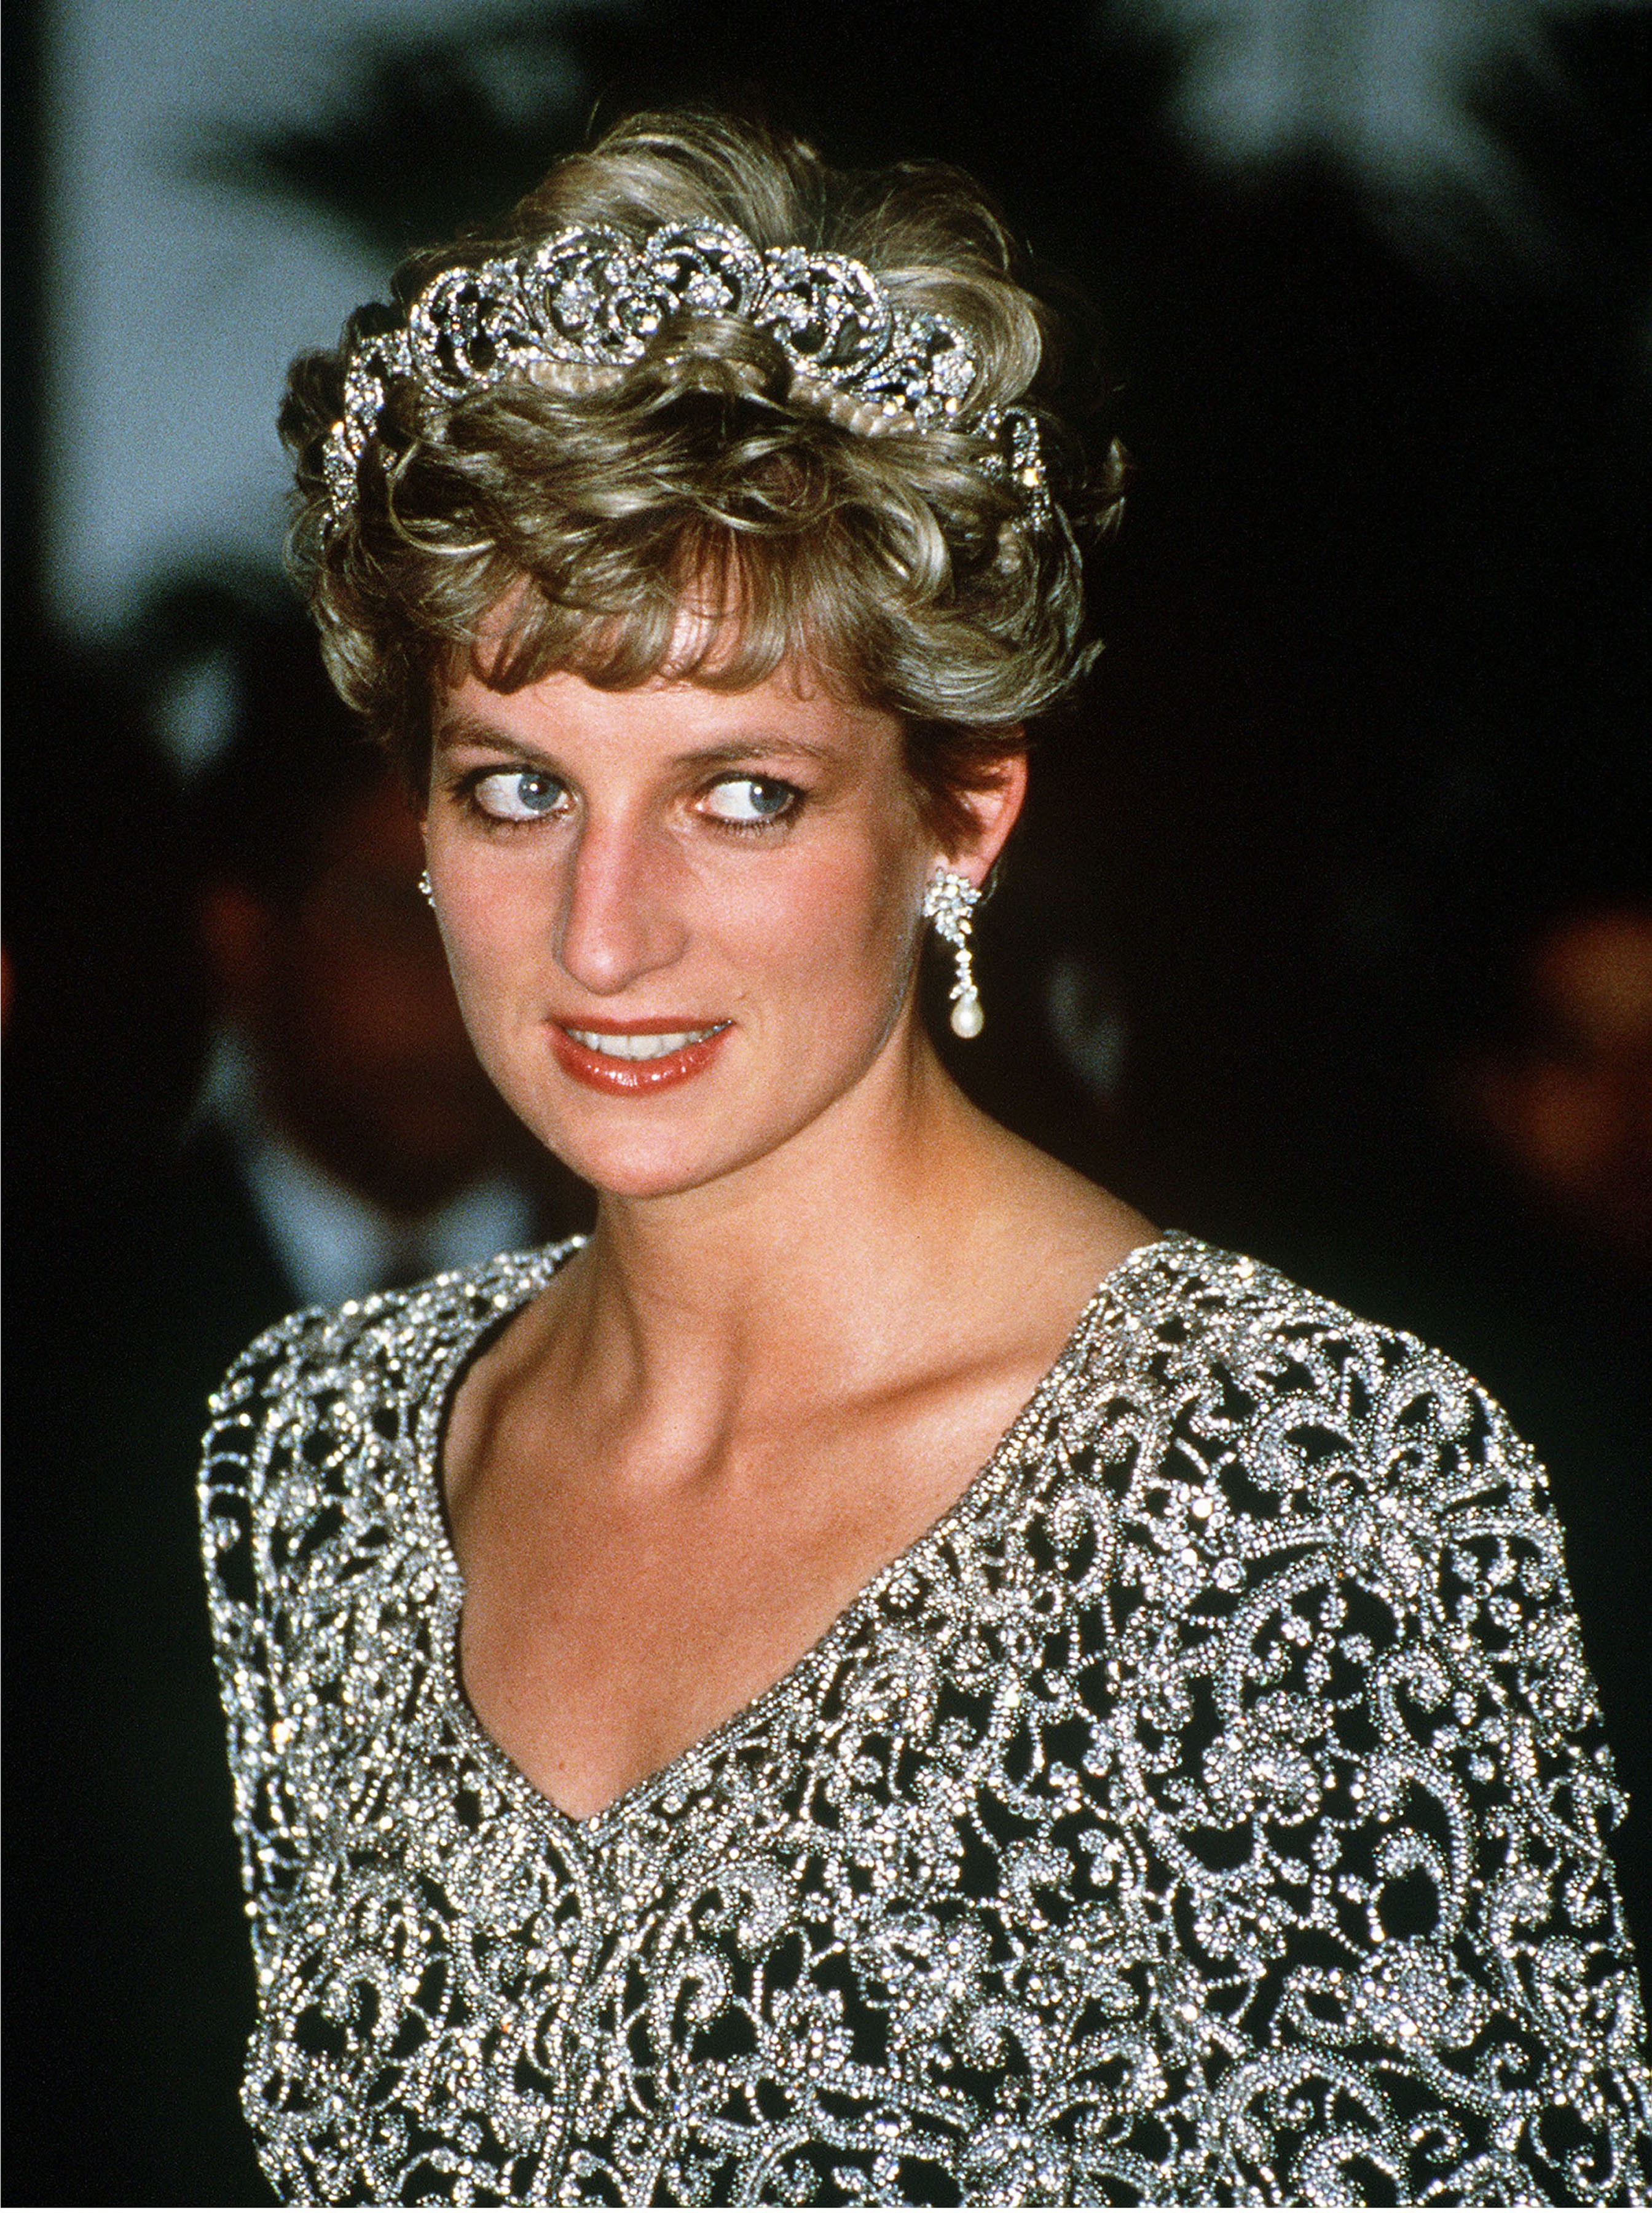 The Princess of Wales attending a banquet given by the President of India, Ramaswamy Venkataraman,  during an official visit to the country,  February 1992. She is wearing the Spencer family tiara and a gown by Catherine Walker. (Photo by Jayne Fincher/Ge (Foto: Getty Images)